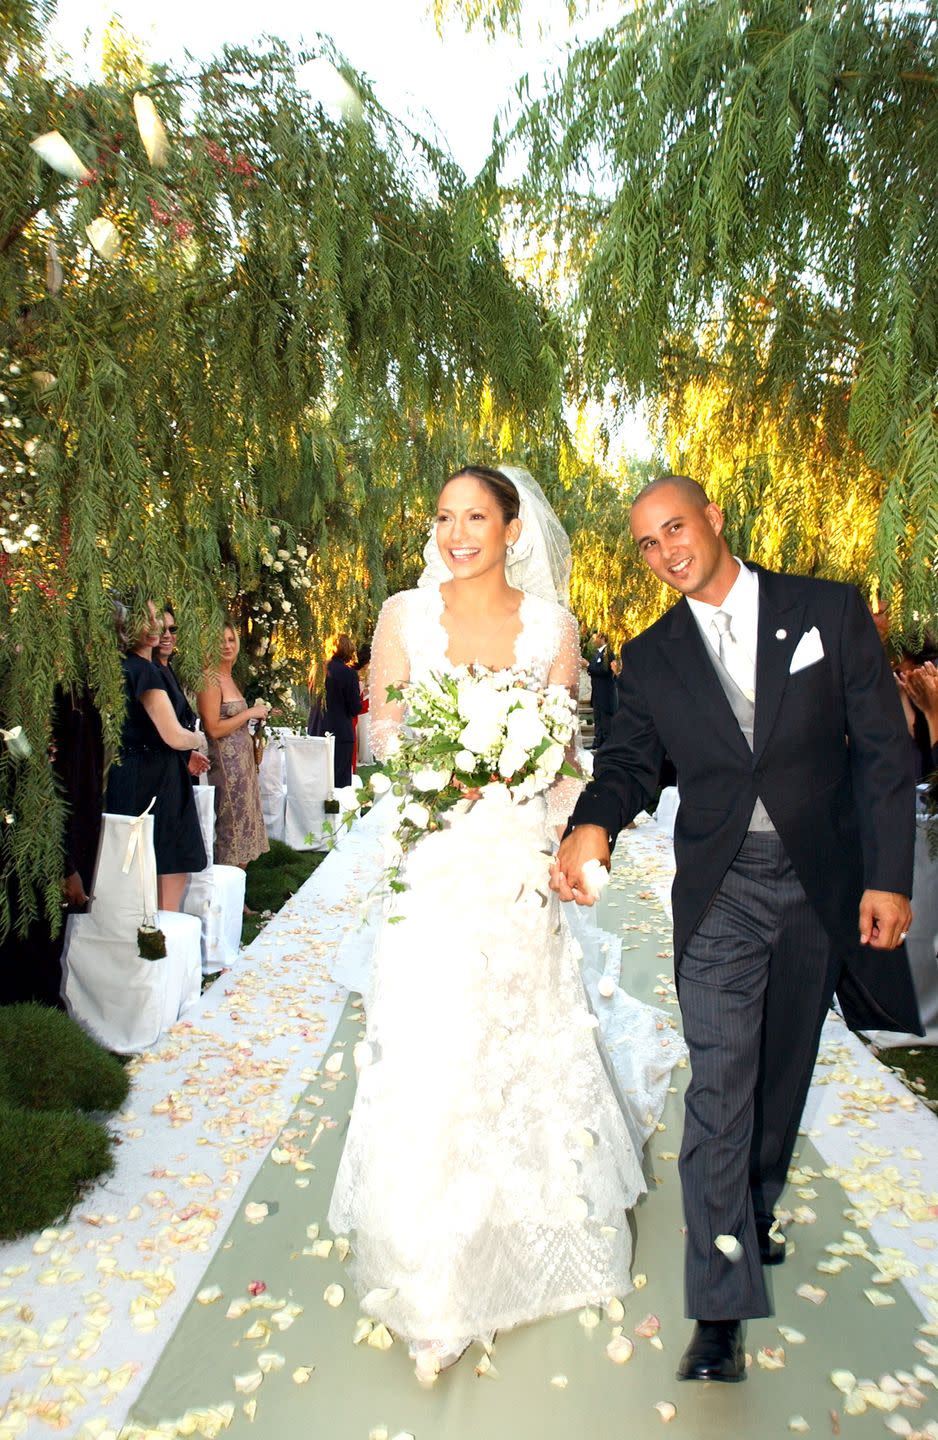 2001: J.Lo two-steps with her choreographer in her second marriage